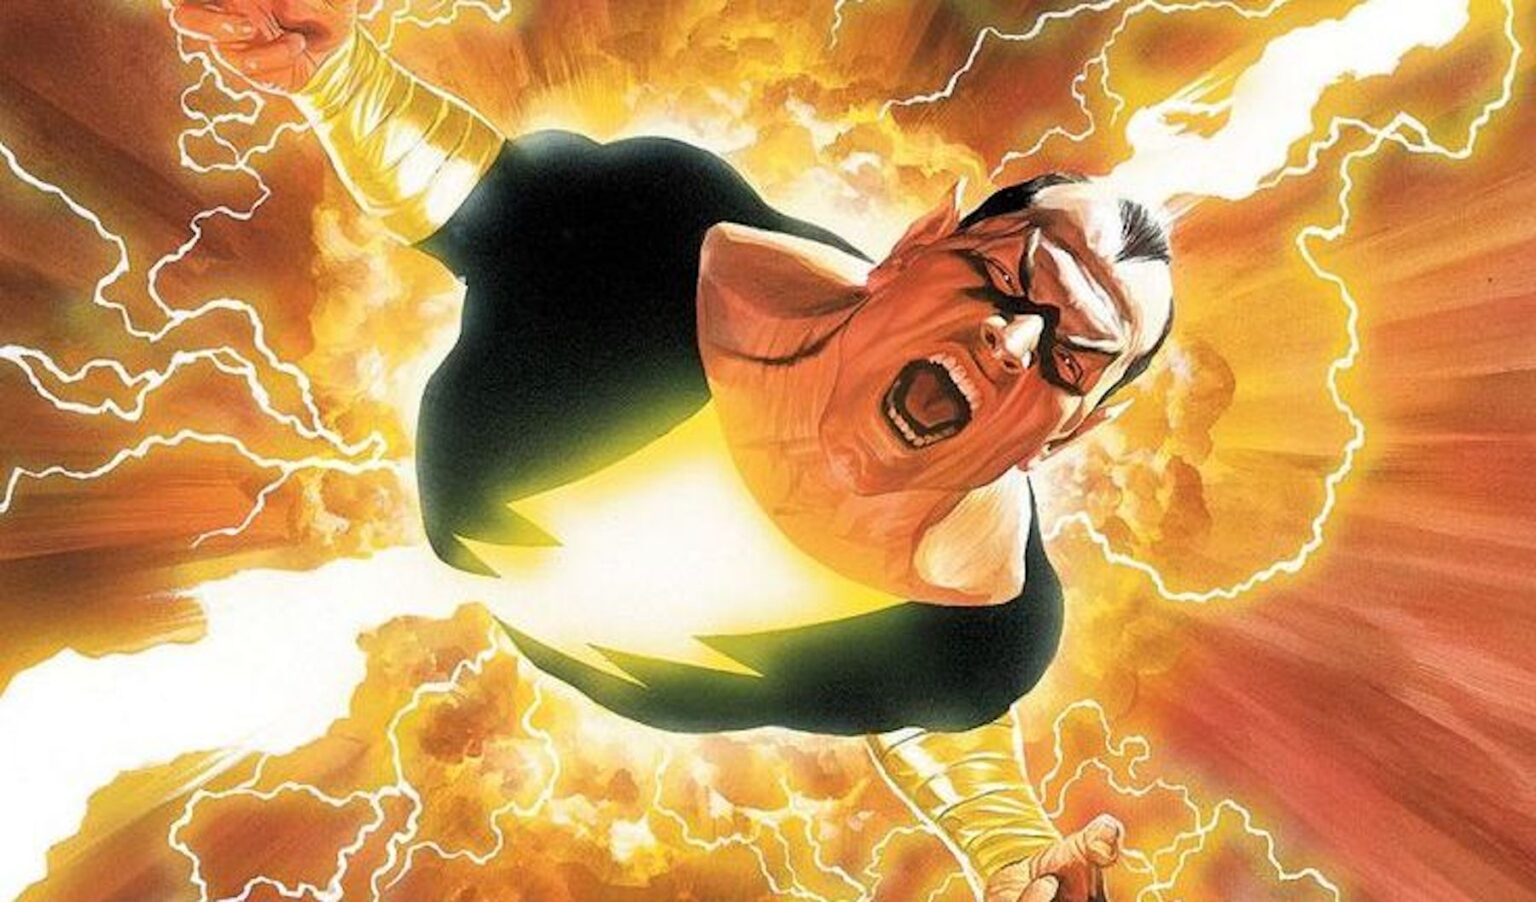 Are we going to see 'Black Adam' in 2021 now that the cast is complete? Learn why we're probably going to get a delay in that release date.